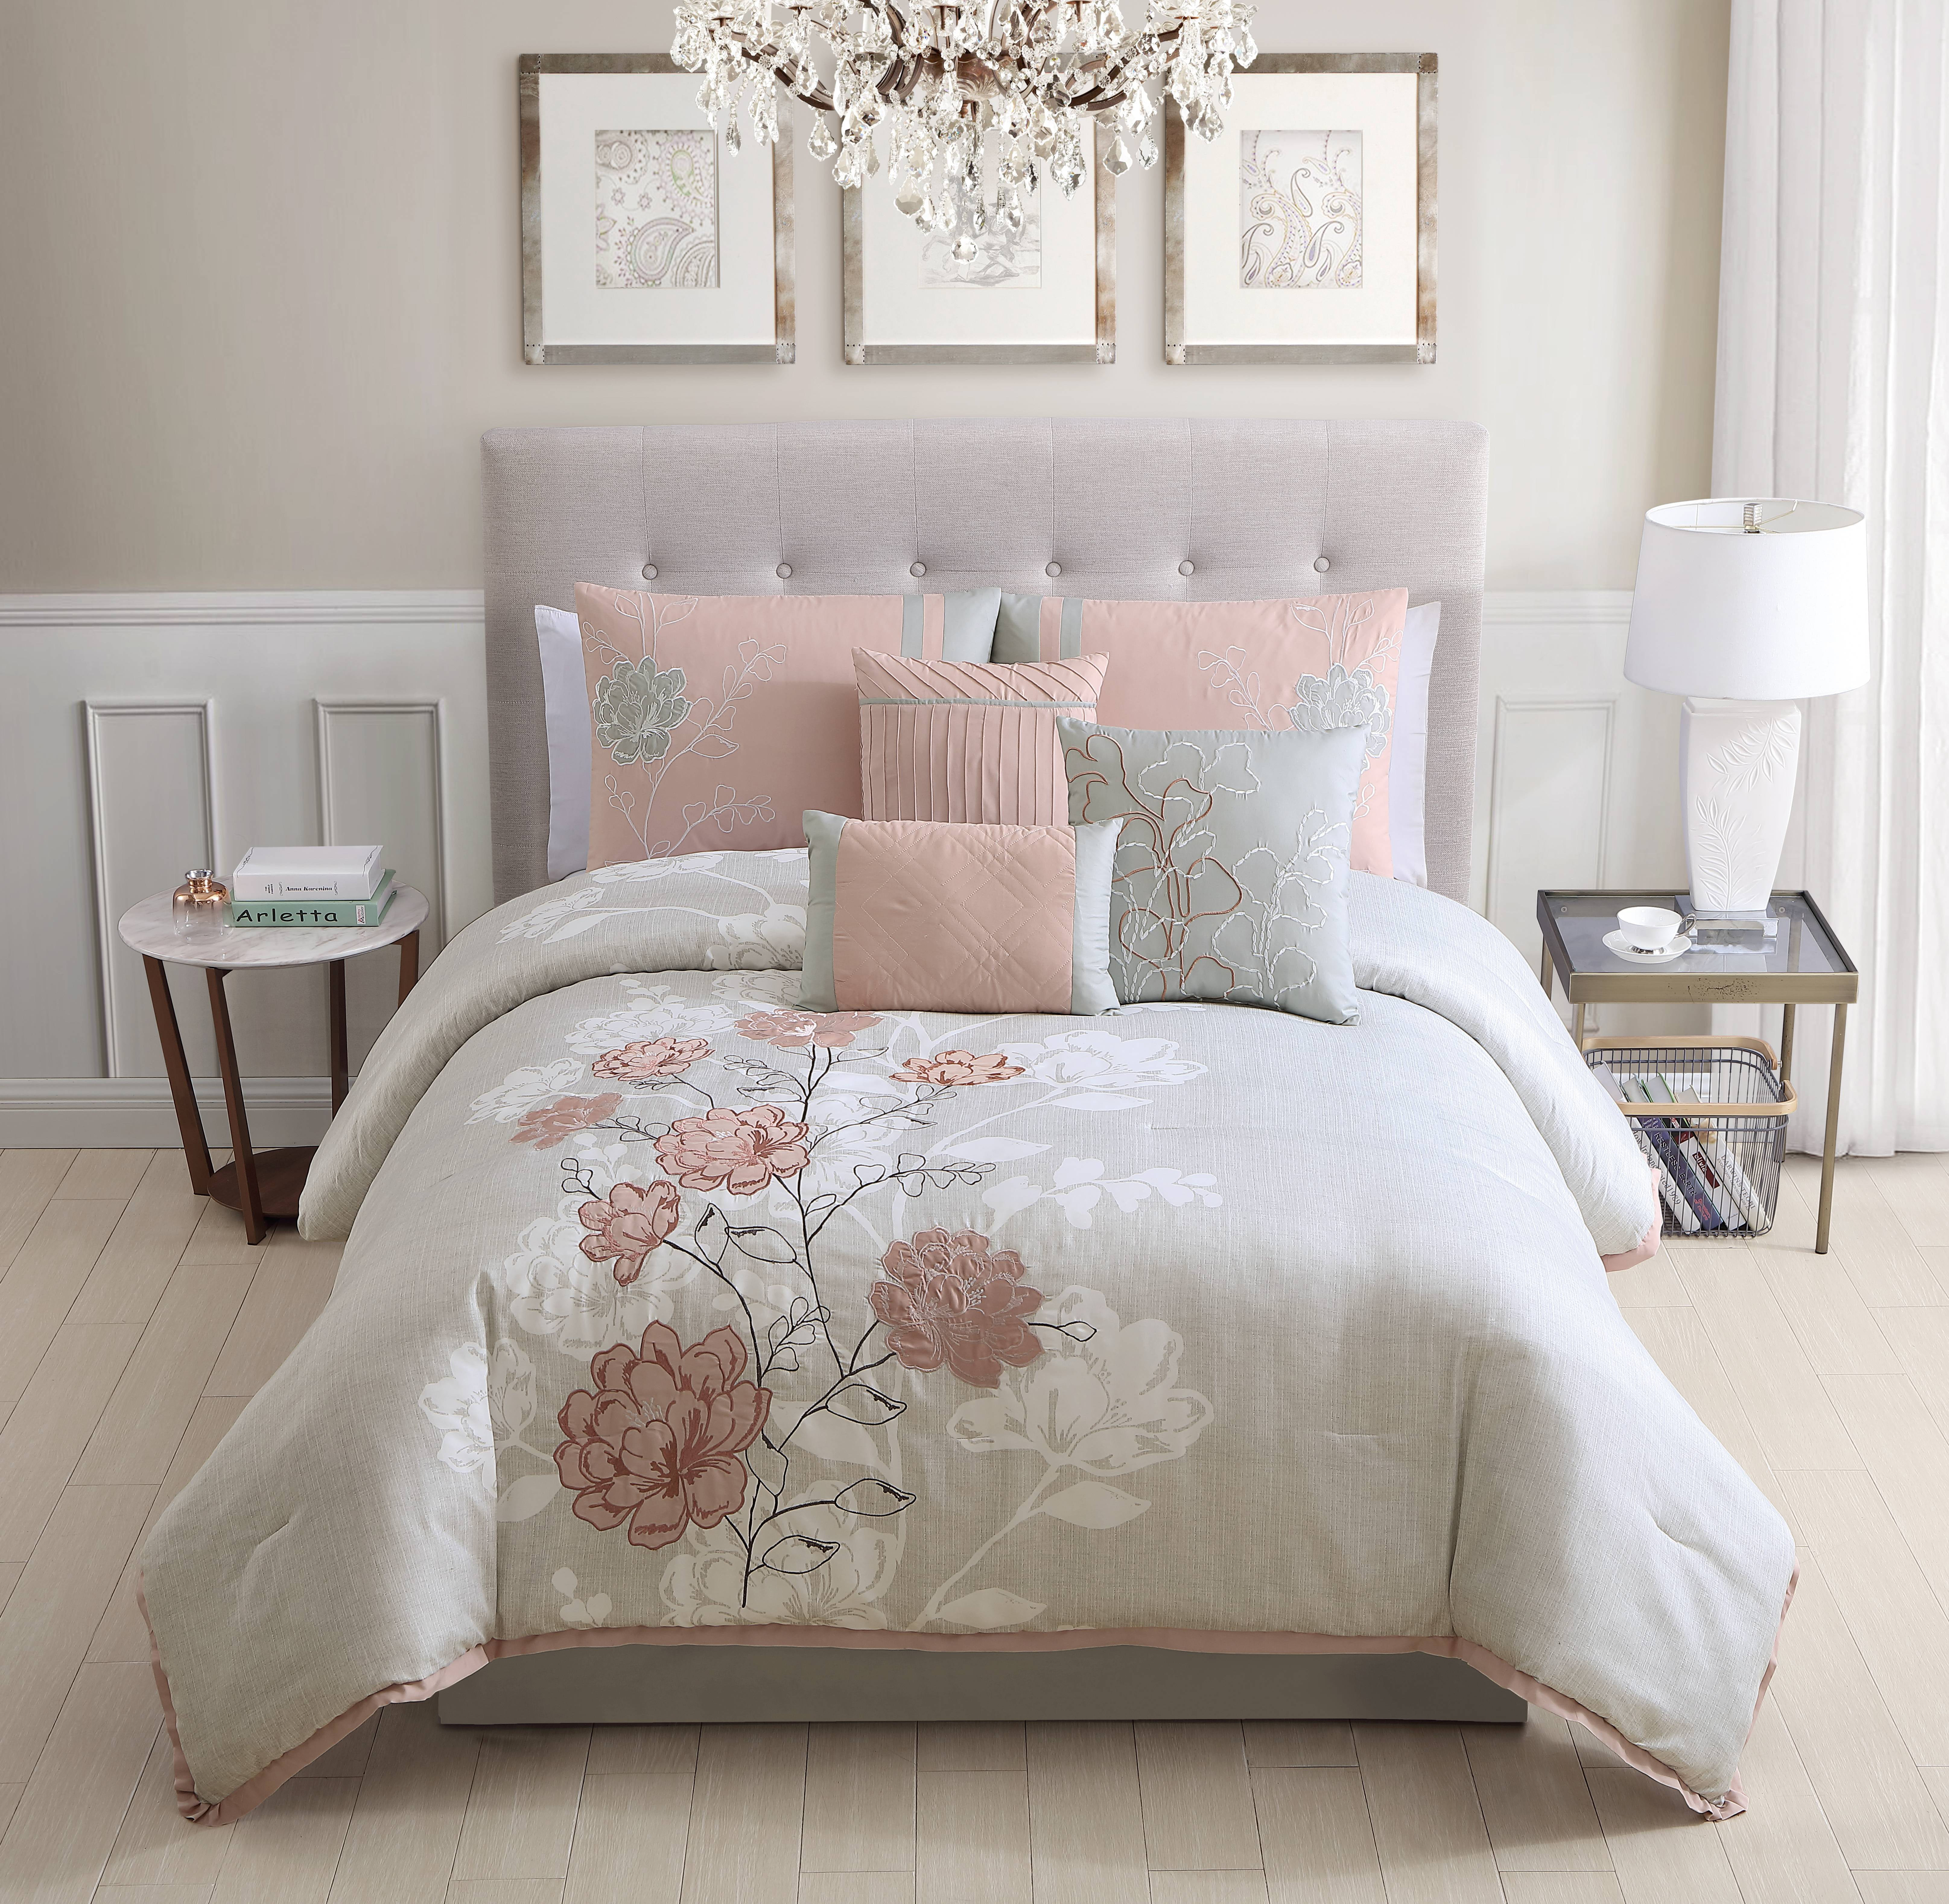 Floral Embroidered Roses 7Piece Comforter Set, Blush, Full